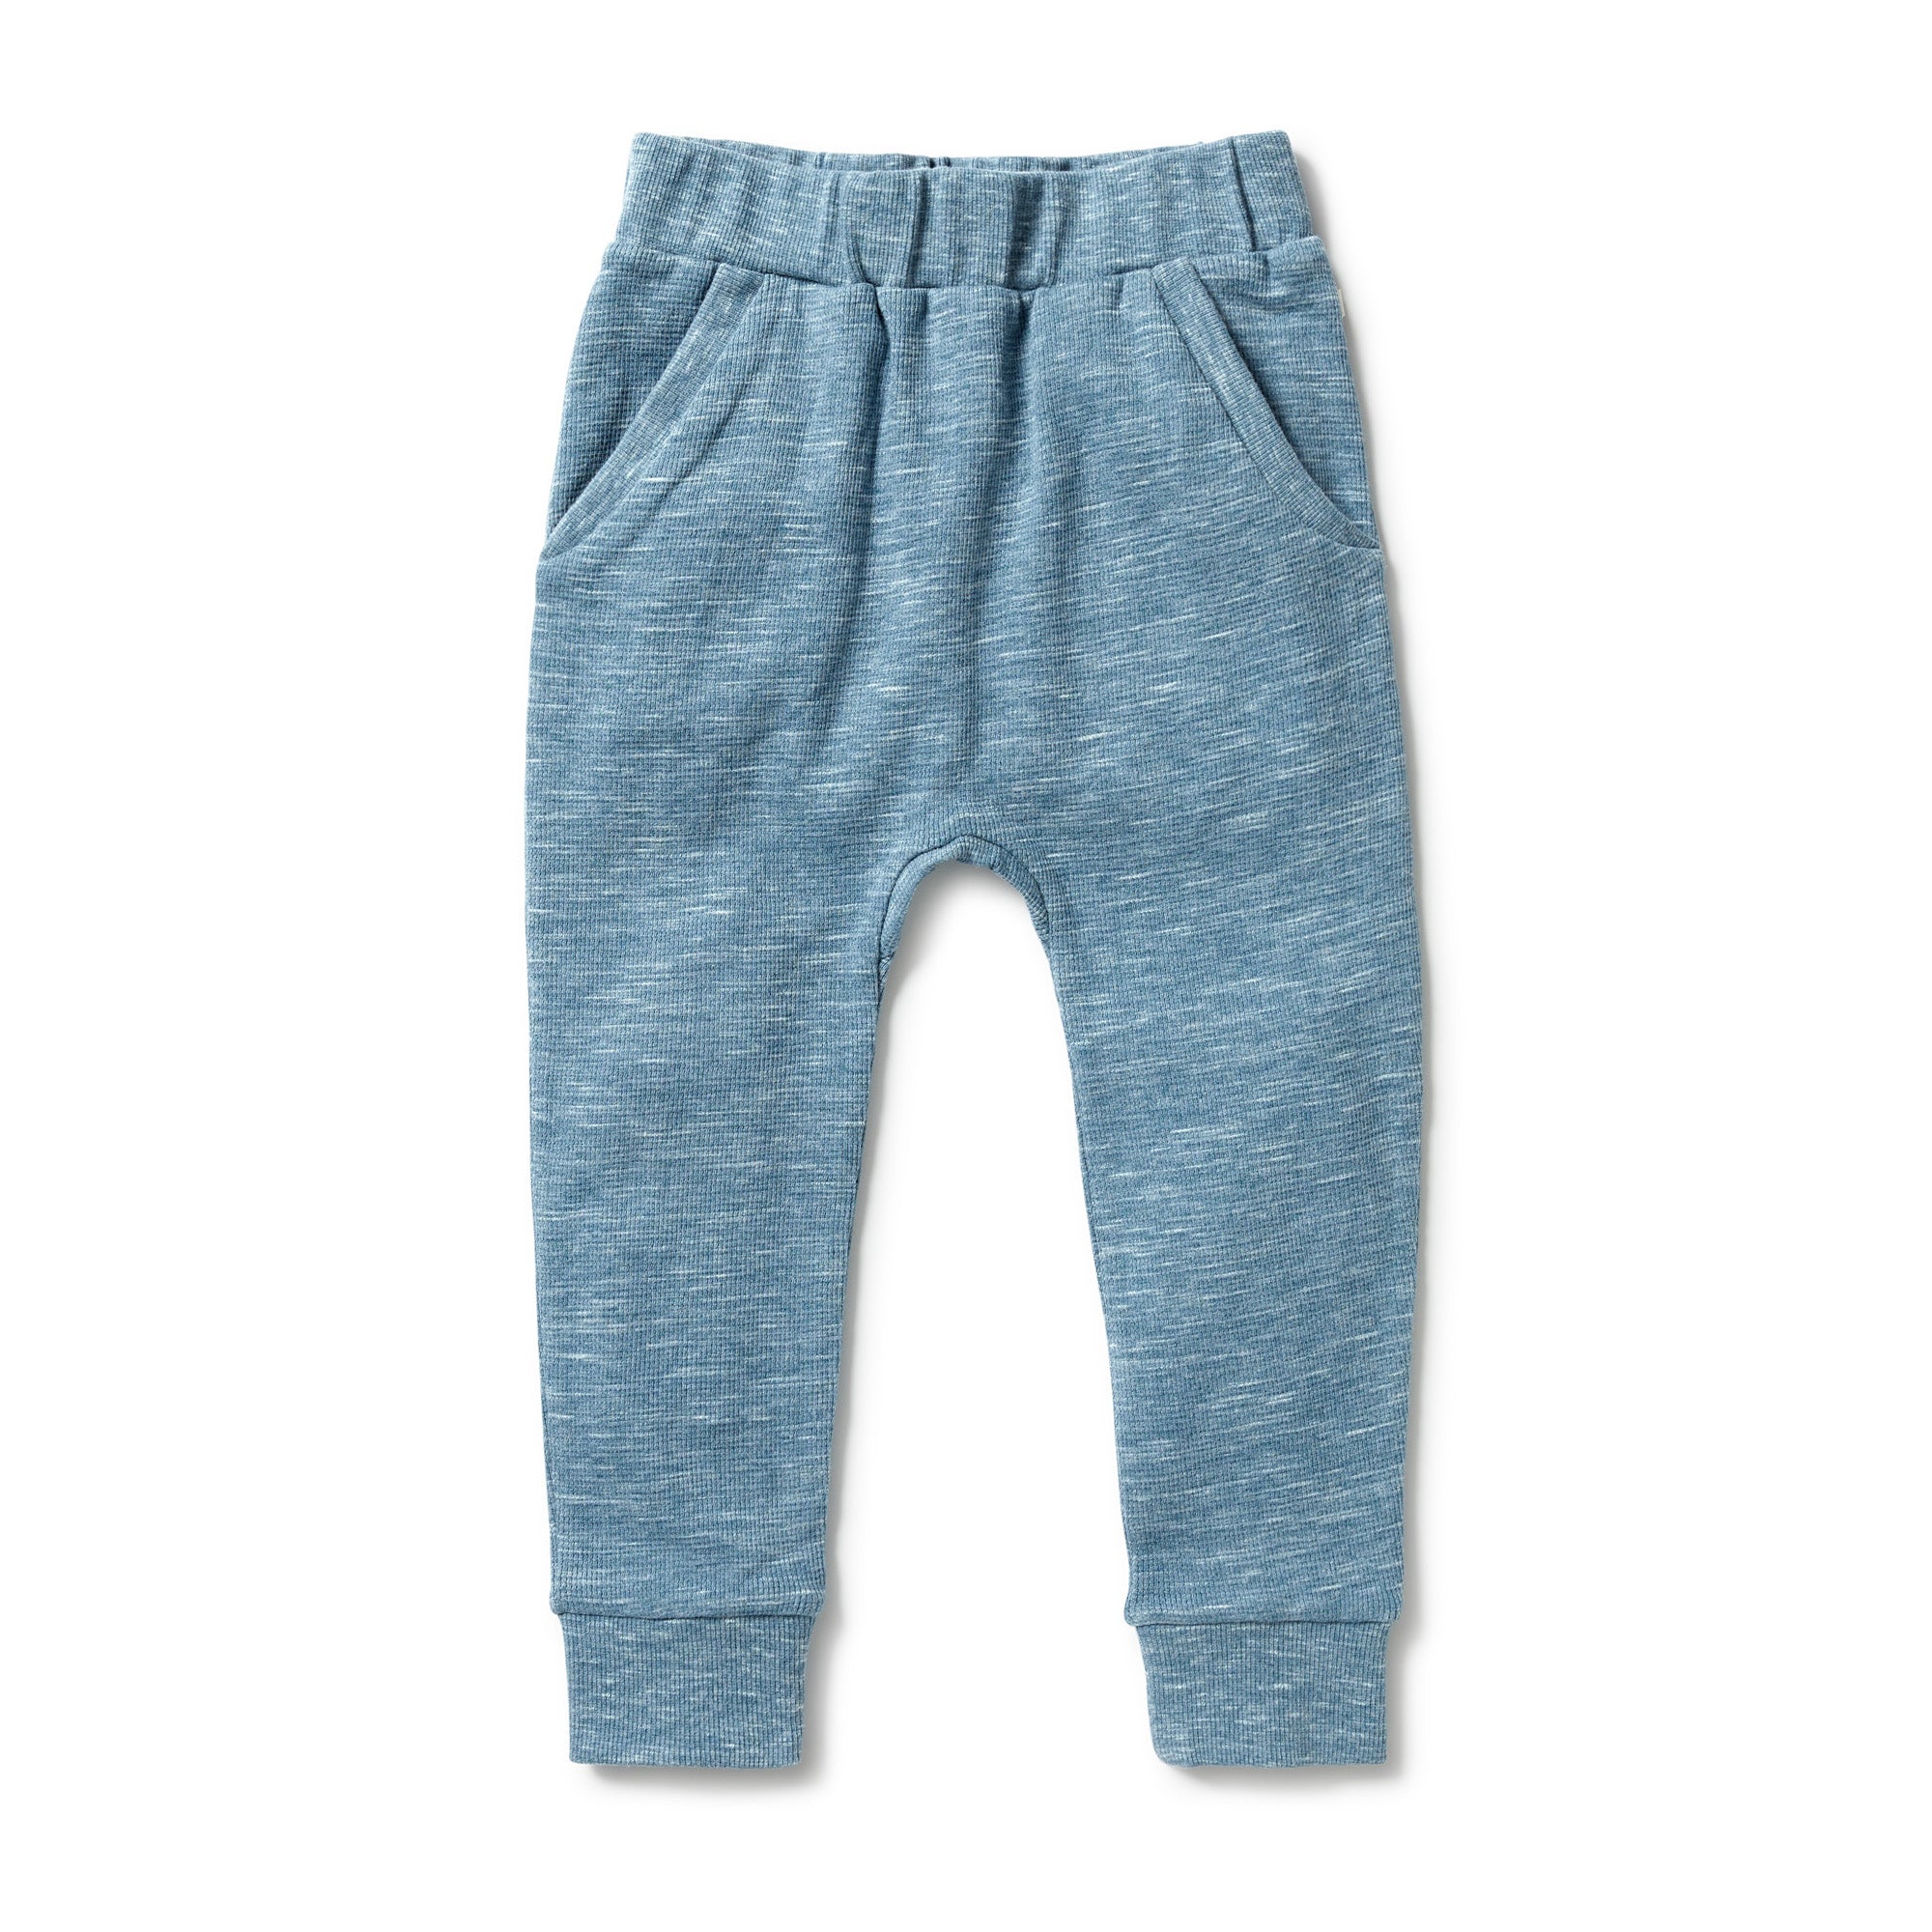 Kids' Clothes - A Thoughtful Selection of Kids' Clothes Online